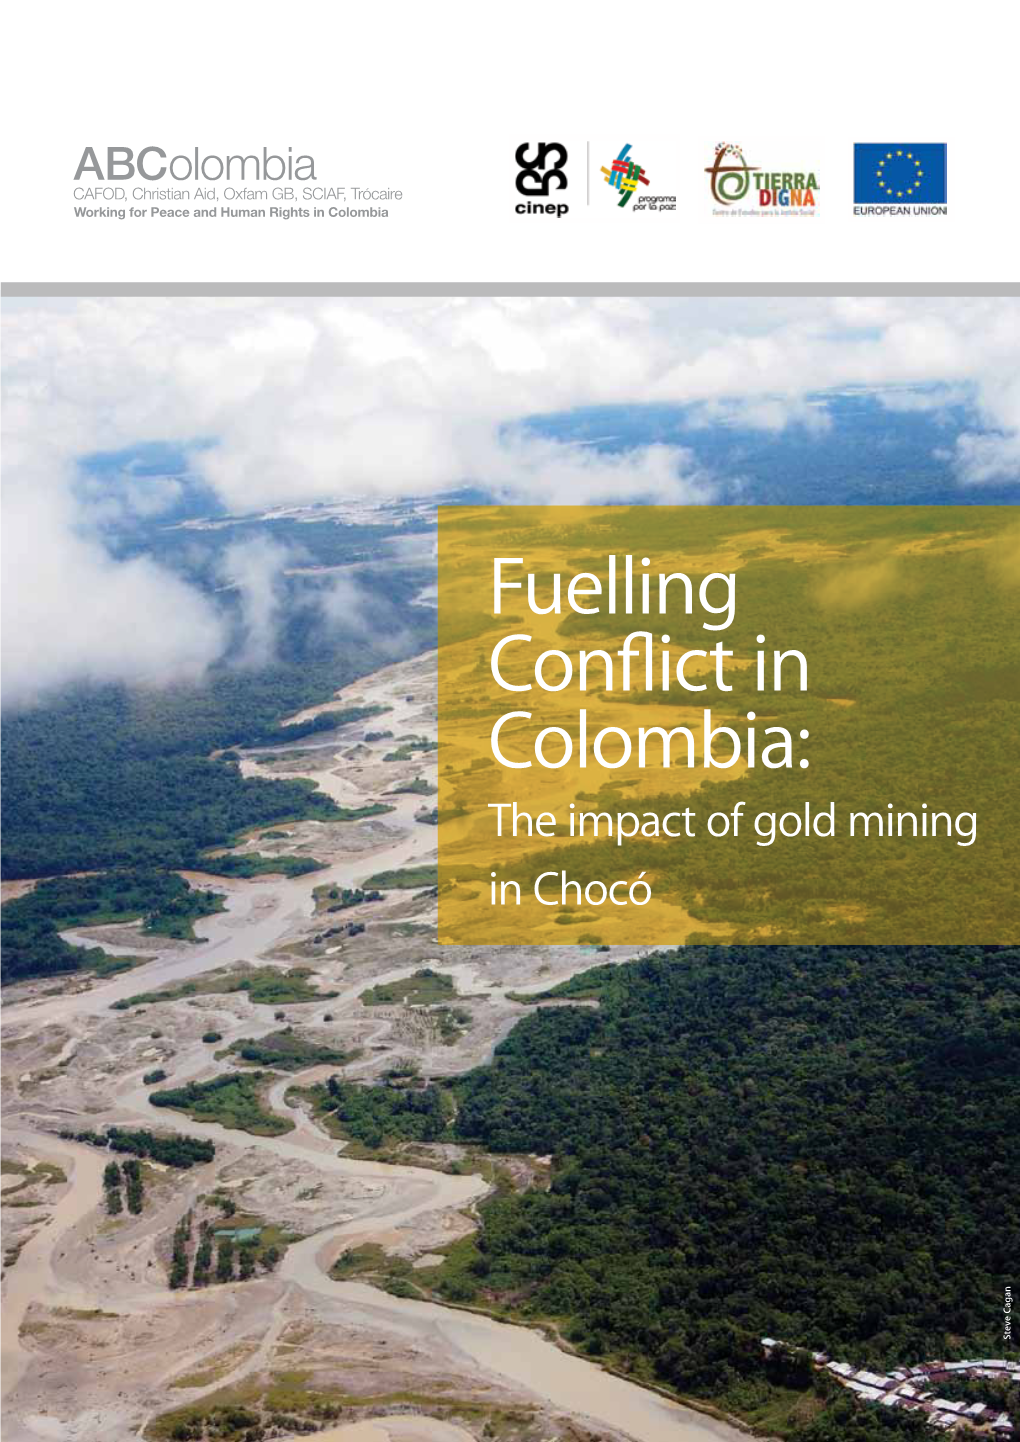 Fuelling Conflict in Colombia: the Impact of Gold Mining in Chocó